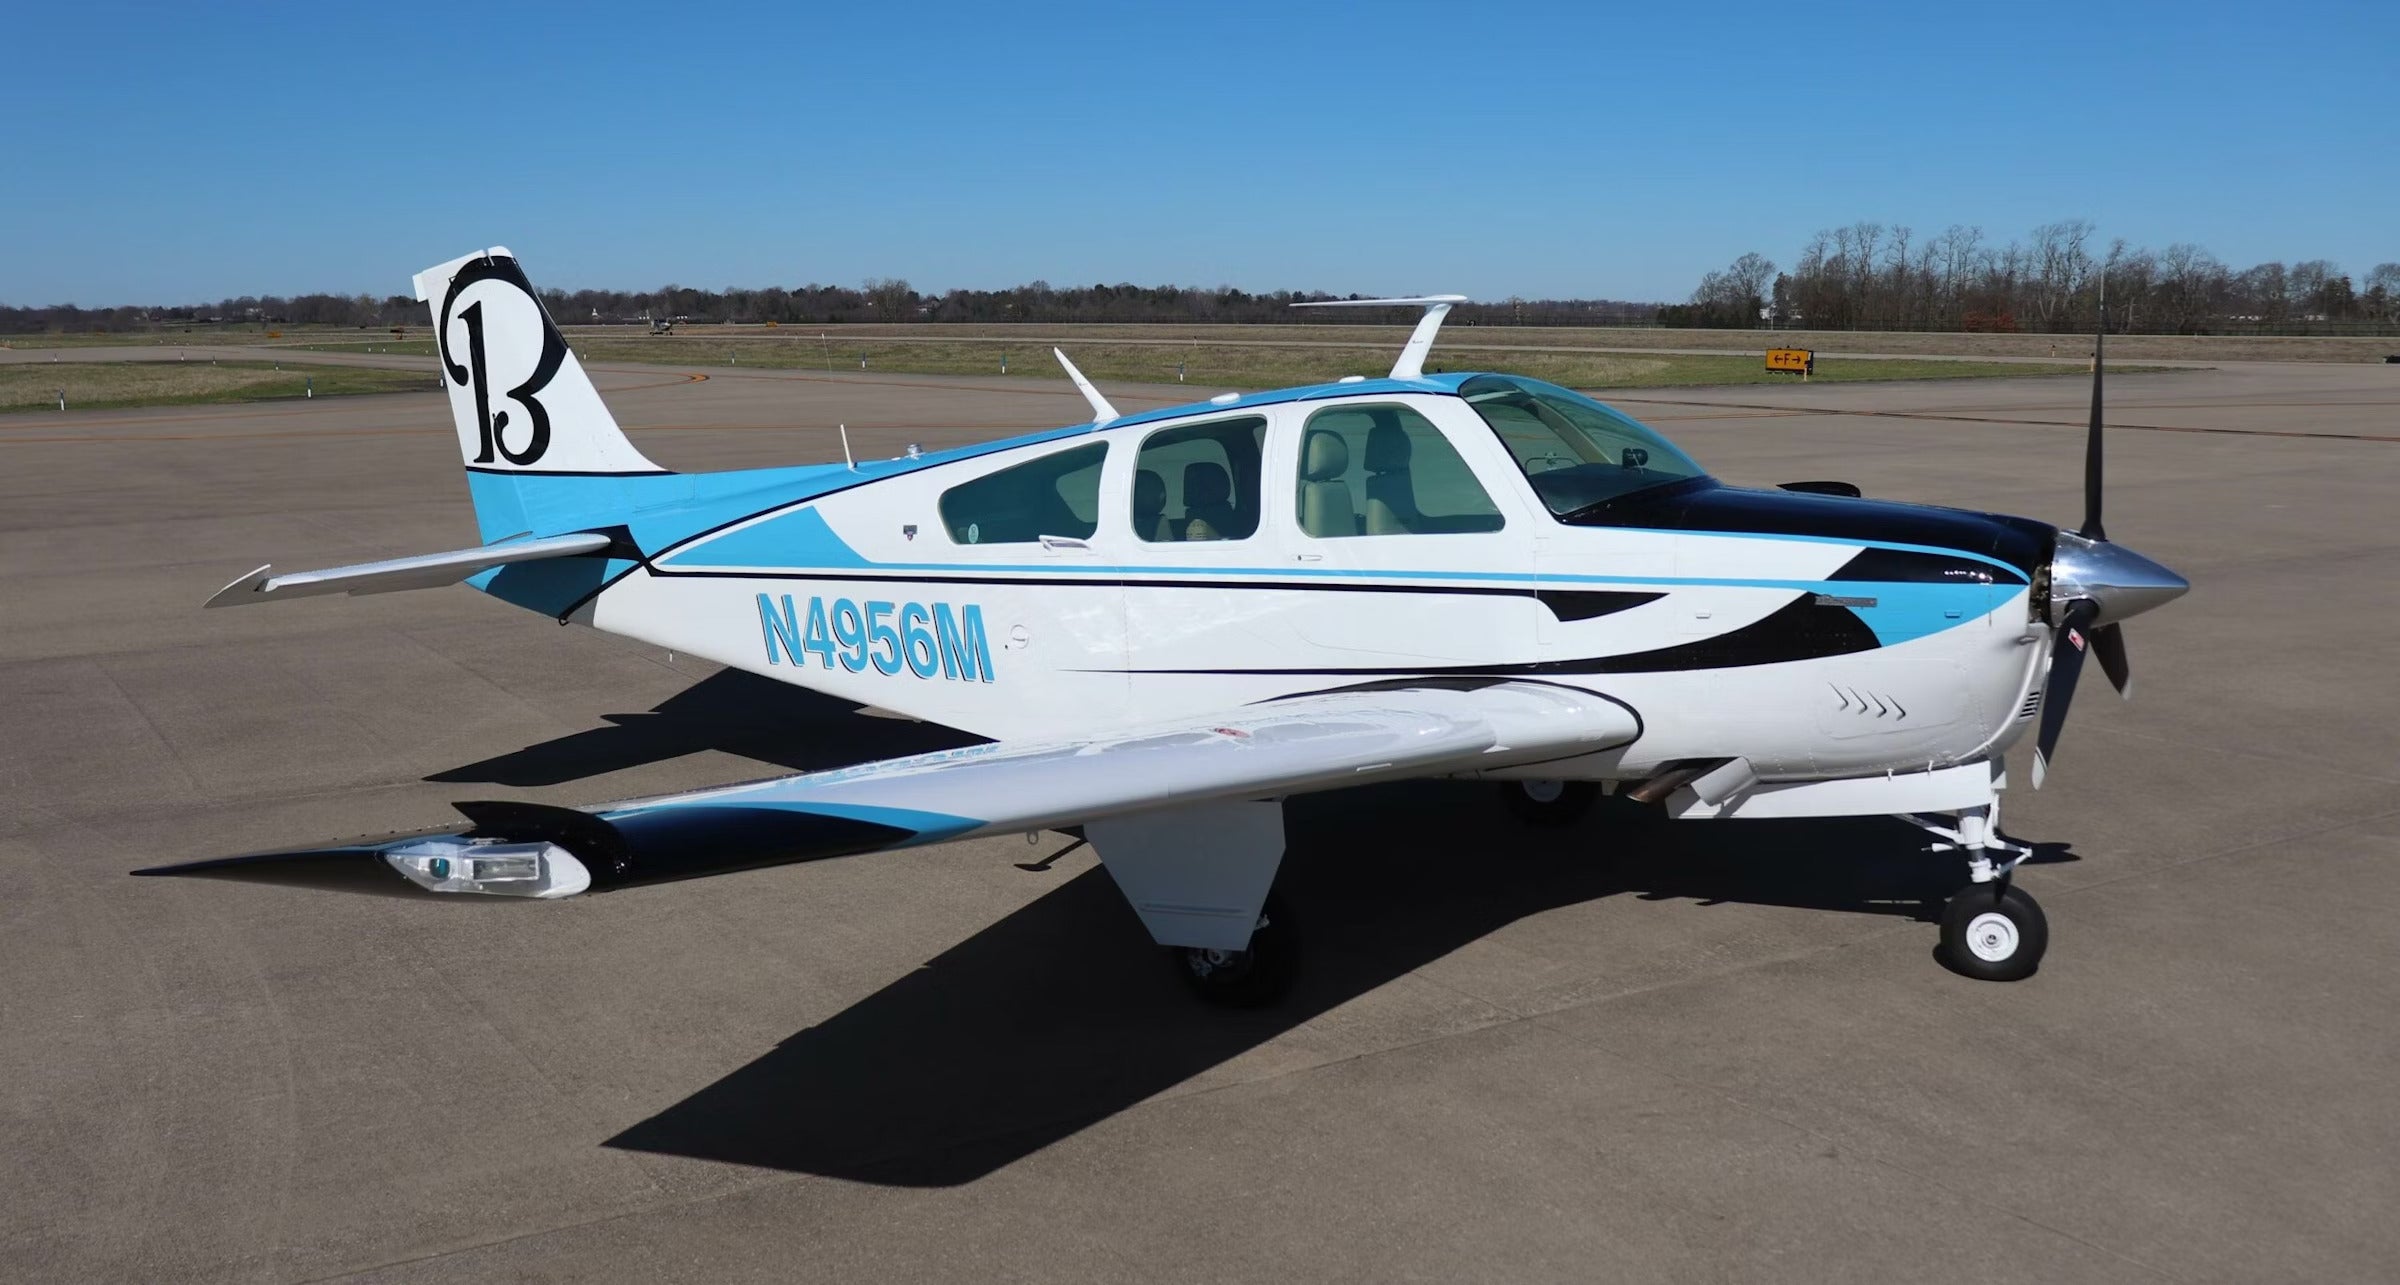 This 1978 Beechcraft F33A Bonanza Is a Definitive High-Performance ‘AircraftForSale’ Top Pick